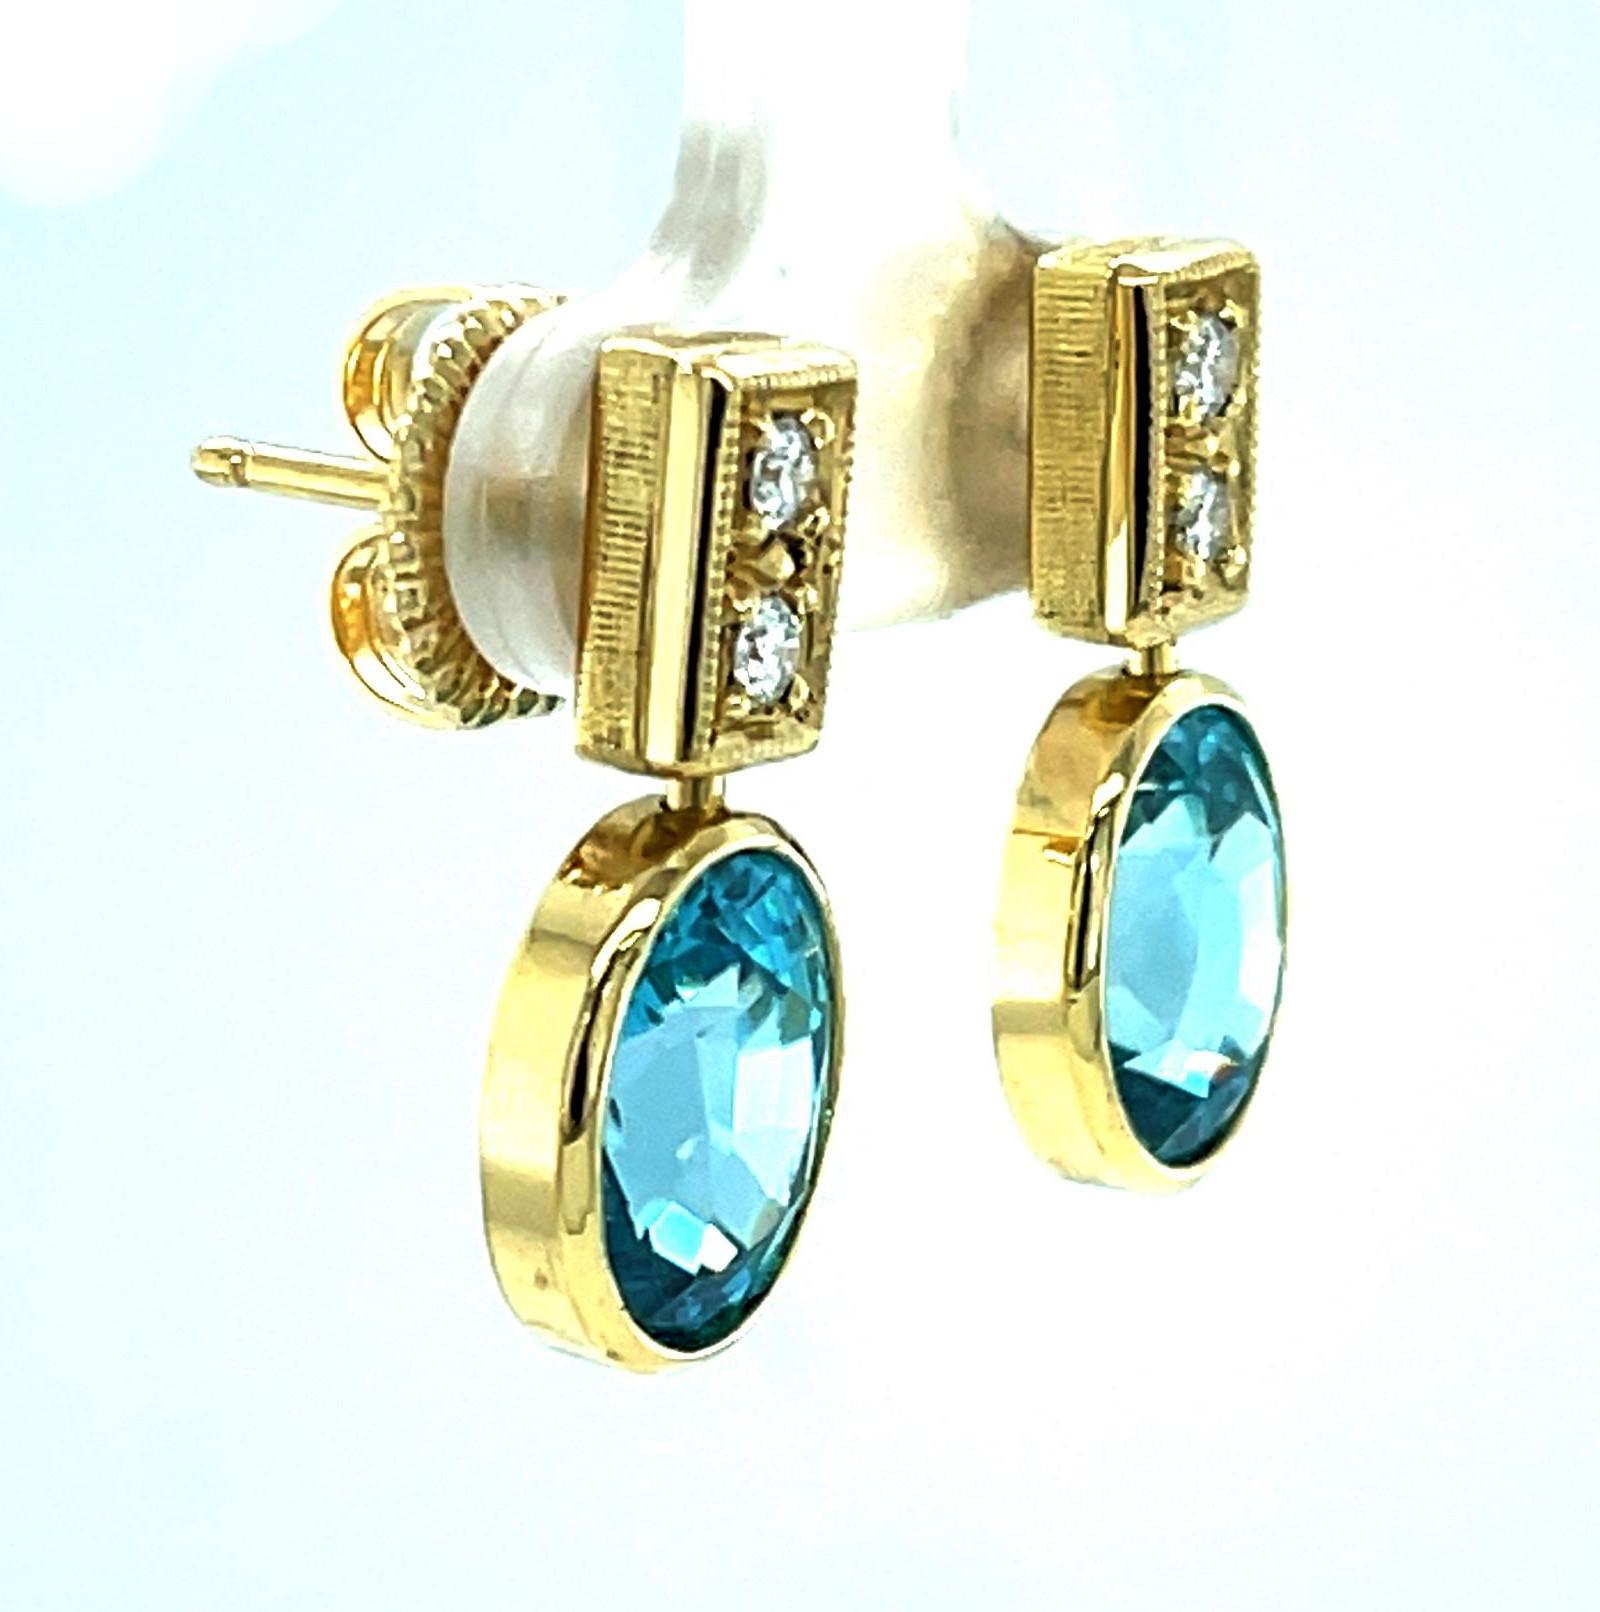 Oval Cut Blue Zircon and Diamond Drop Earrings in Yellow Gold, 9.38 Carats Total For Sale